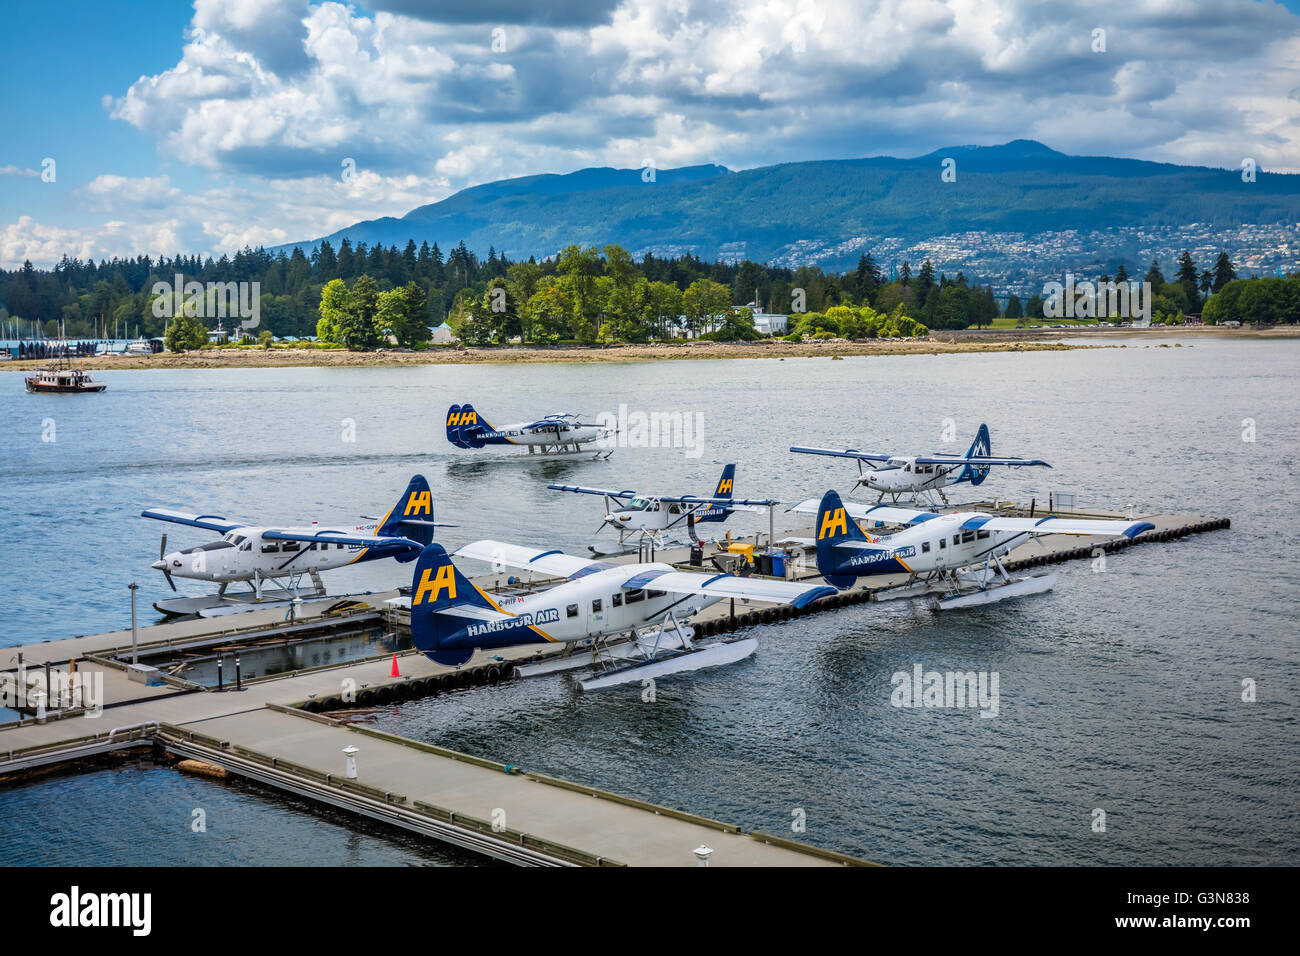 Seaplanes in the harbor of Vancouver, BC, Canada Stock Photo